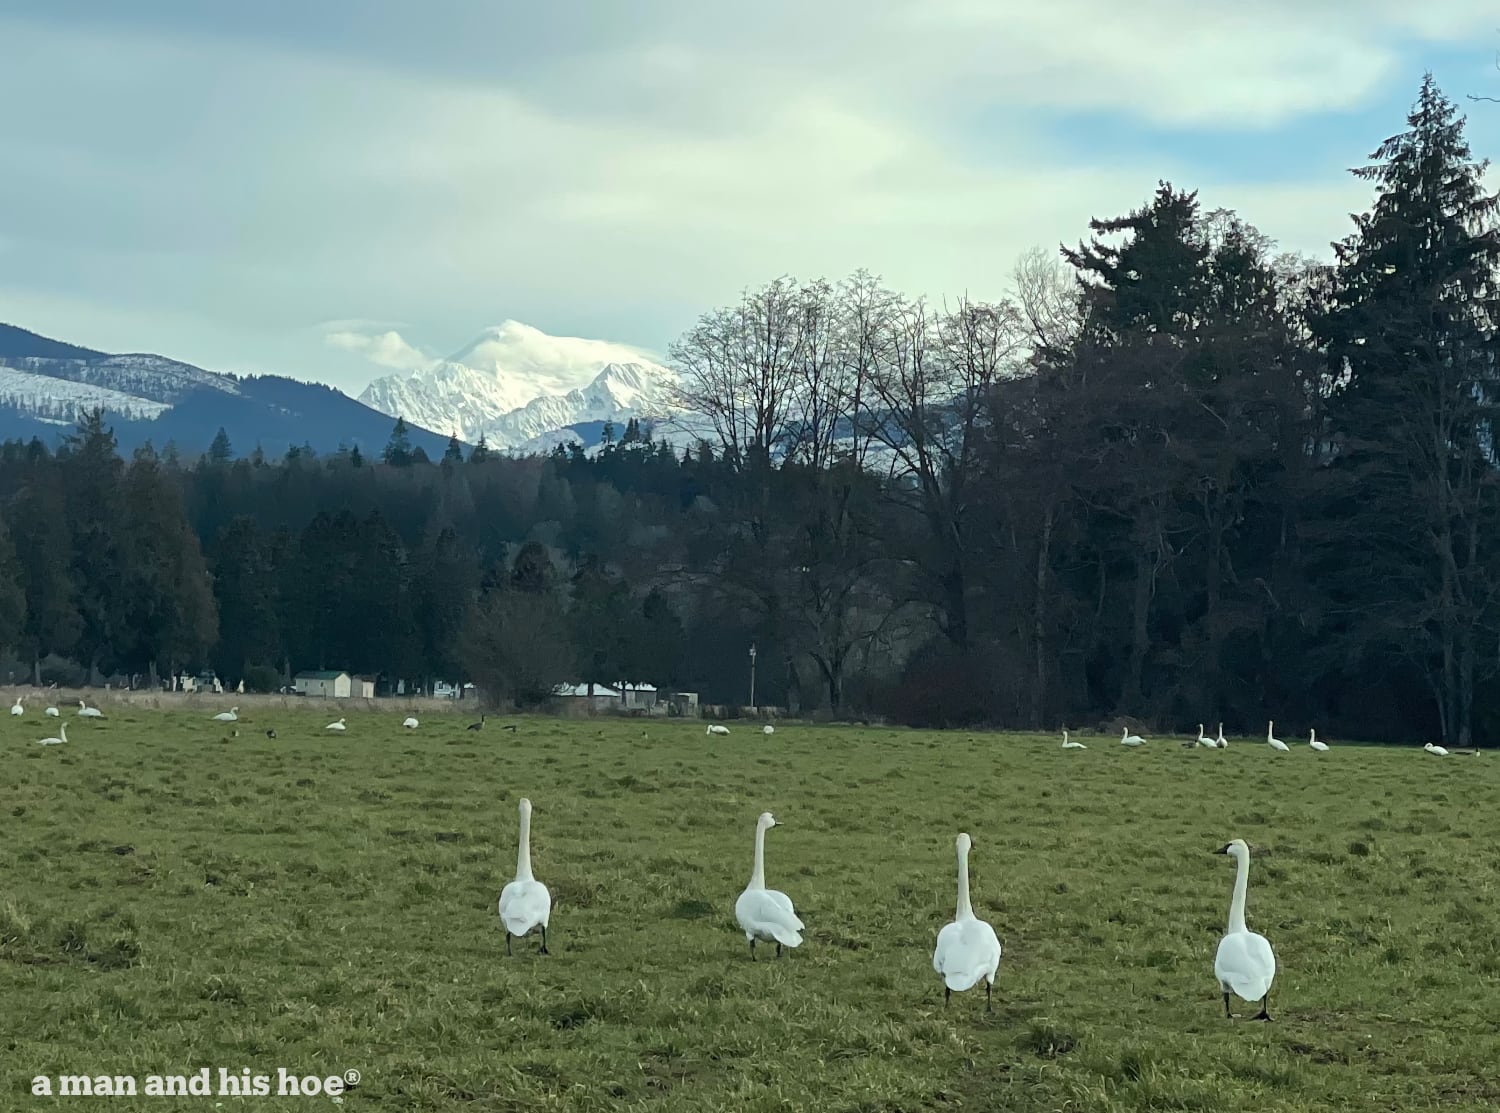 Swans on a spring field